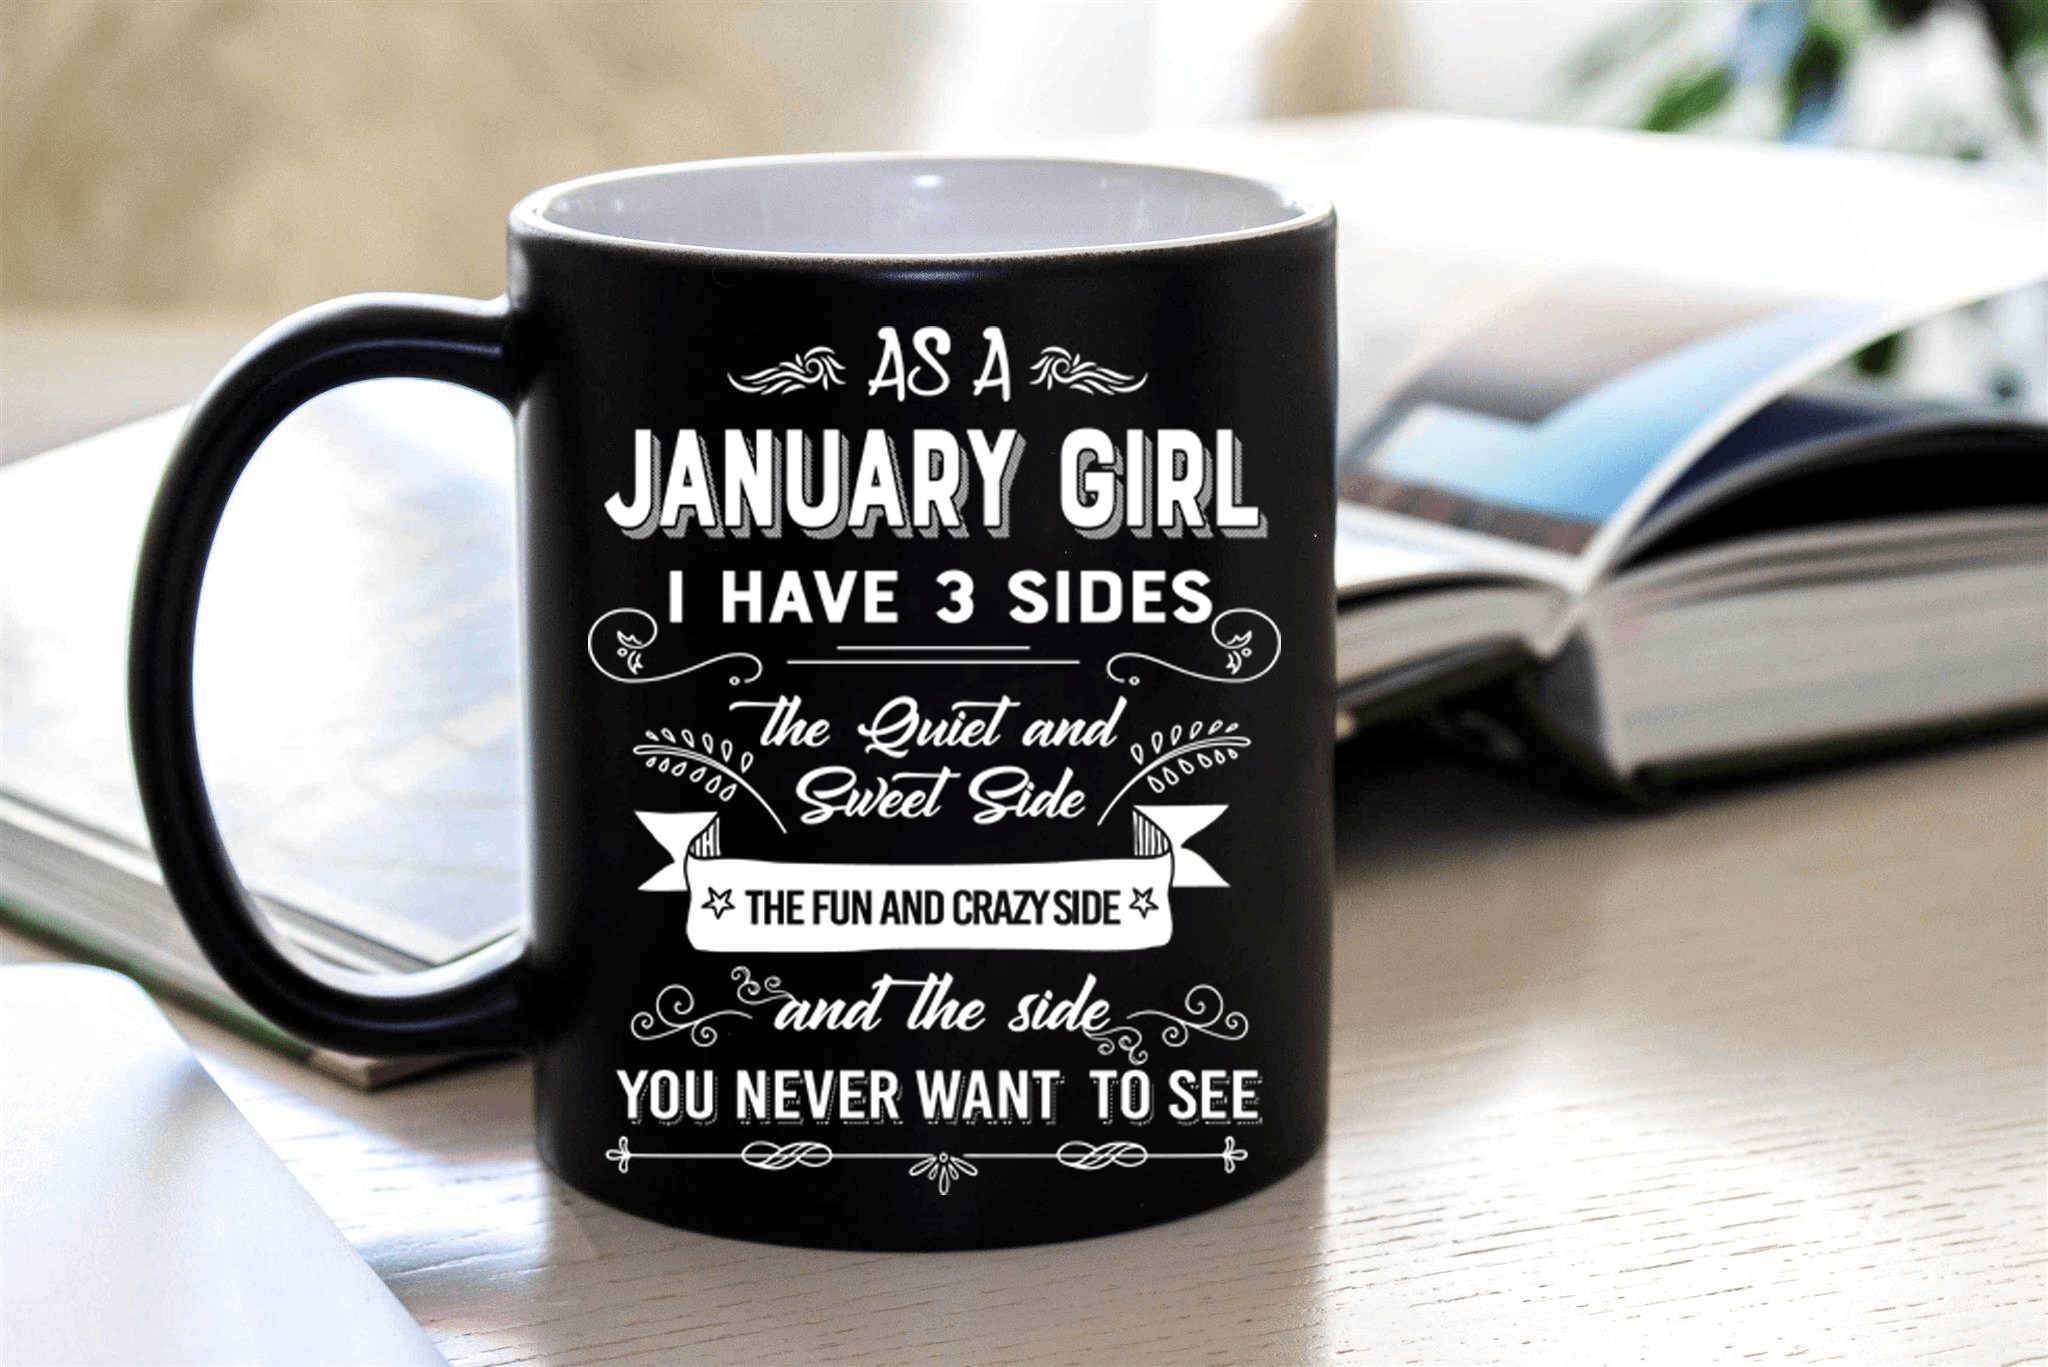 "As A January Girl I have Three Sides The Quite And Sweet side"